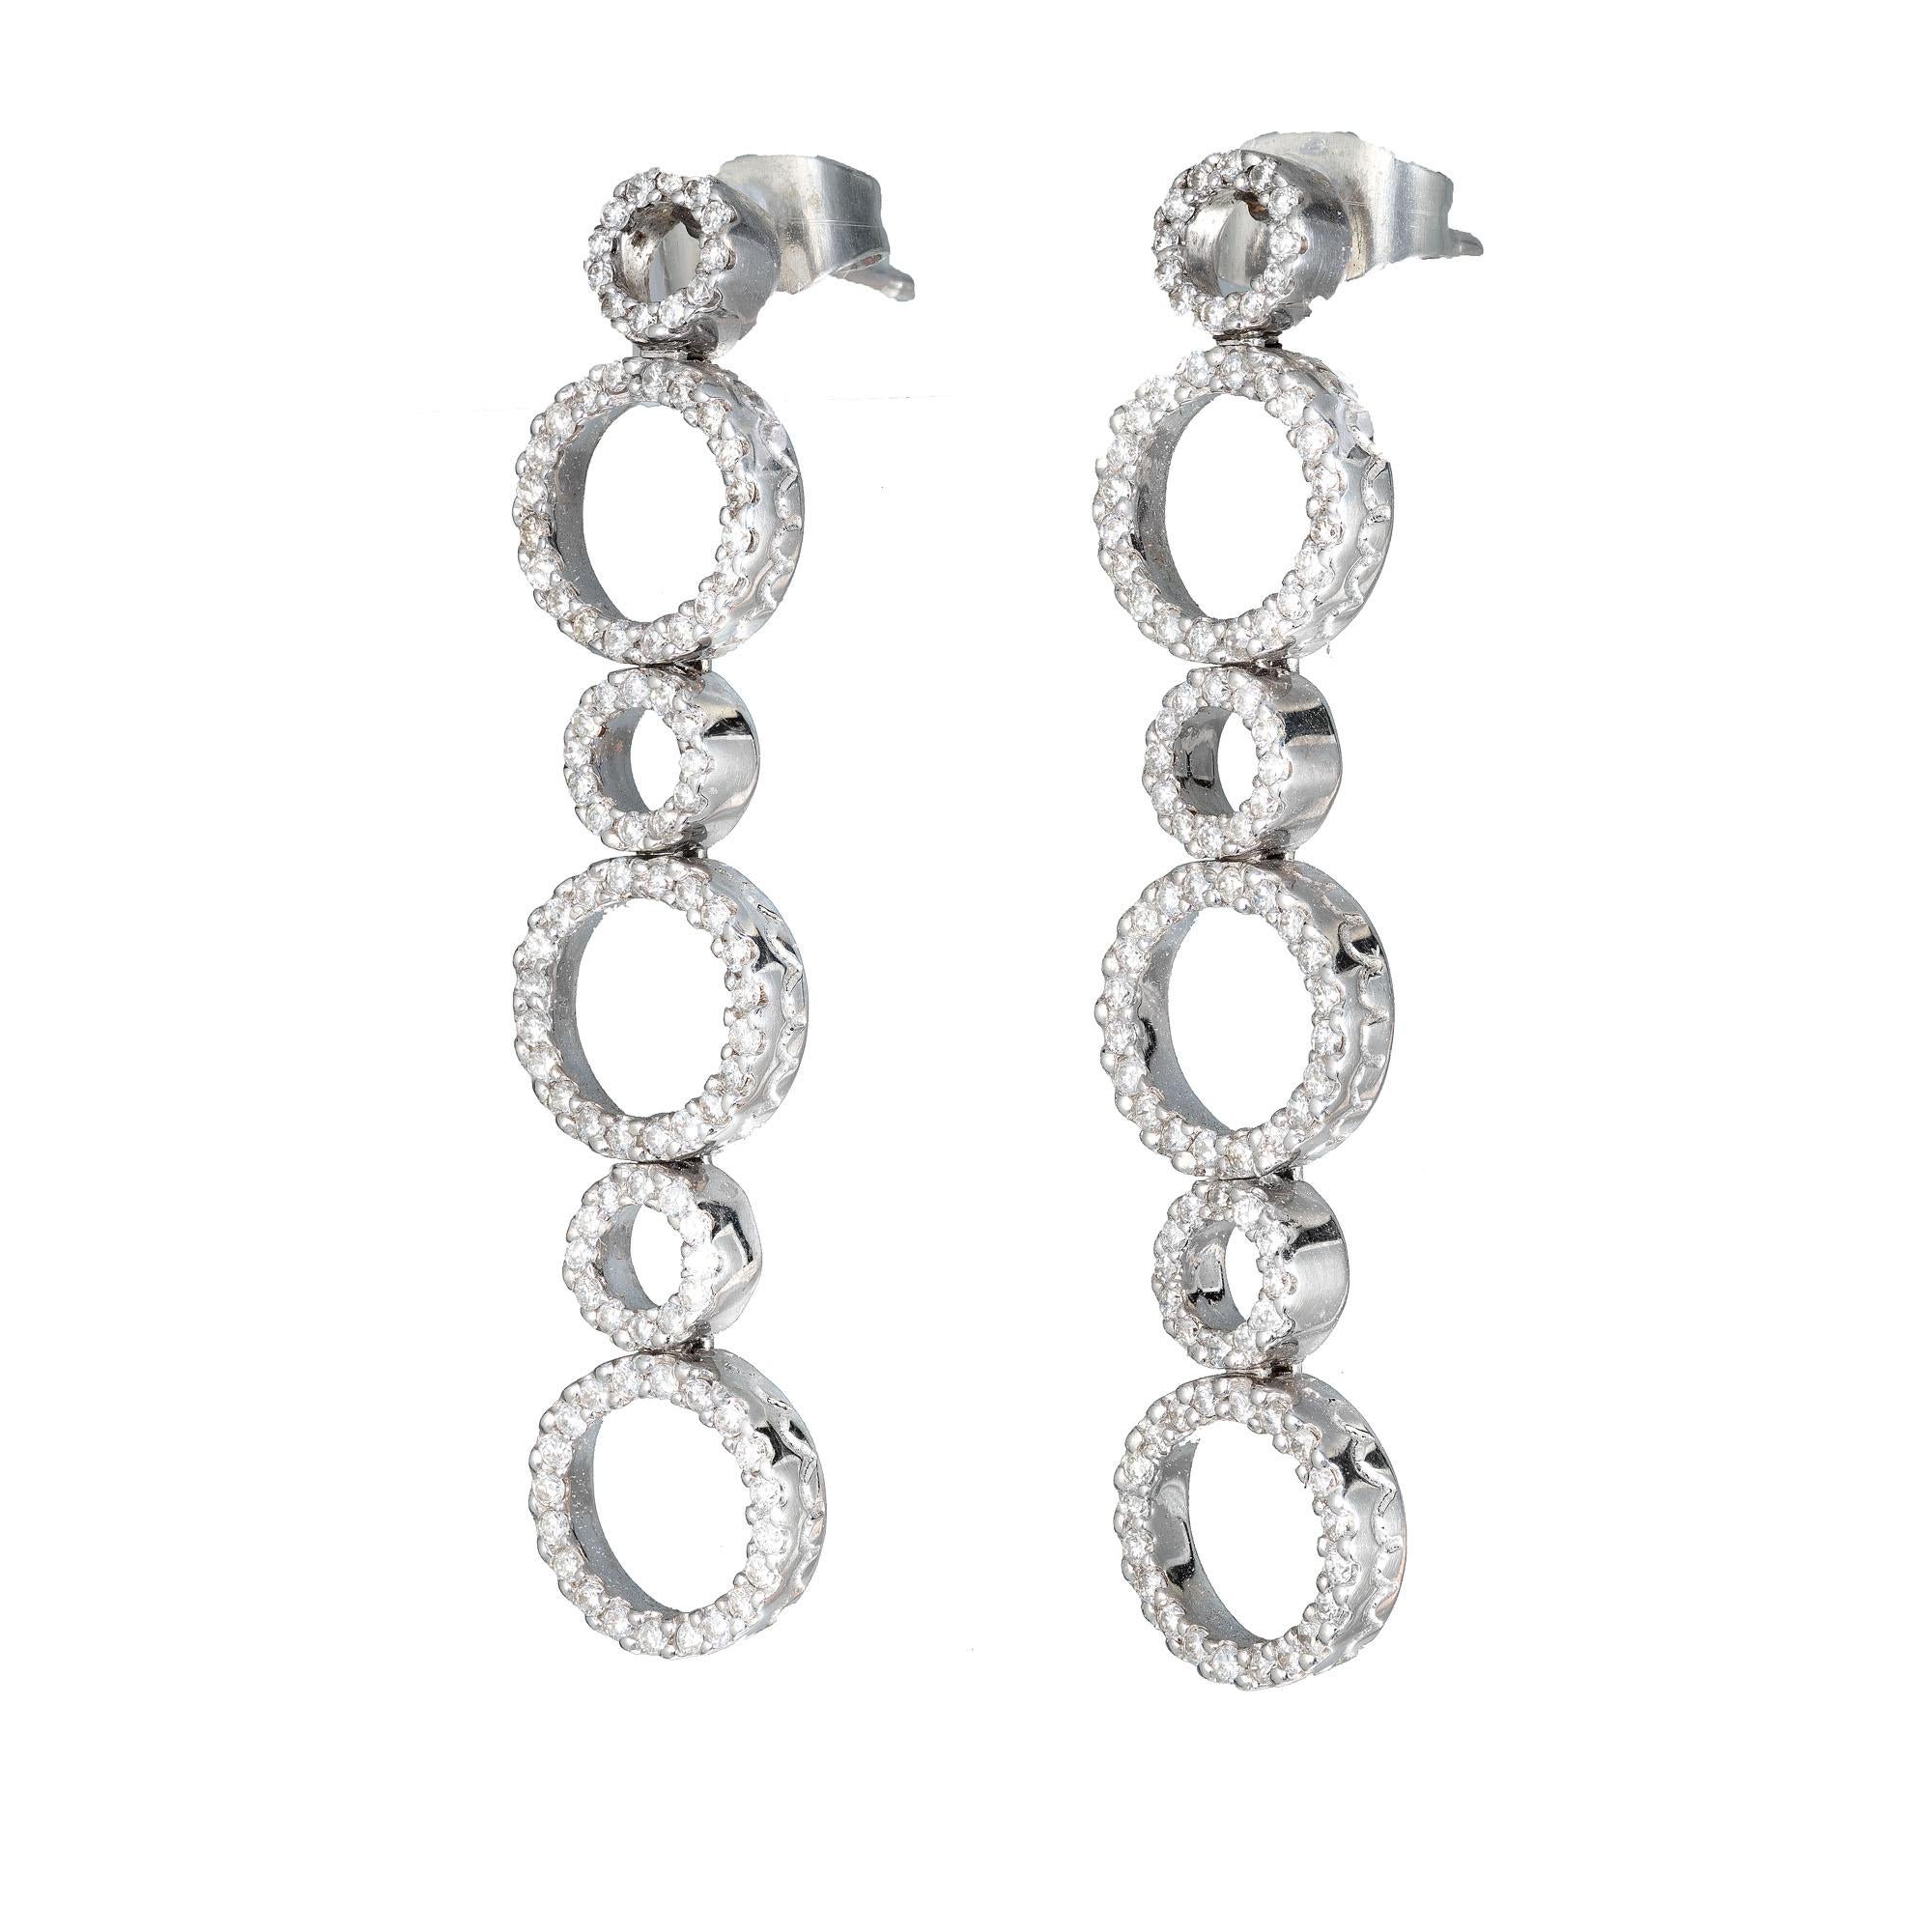 Circle design 14k white gold diamond dangle drop earrings. Common prong set.

192 full cut diamonds, approx. total weight 1.00cts, H, SI
14k White Gold
Tested:  14k white gold
5.9 grams
Top to bottom: 39mm or 1.54 inches
Width:  .32 inch or